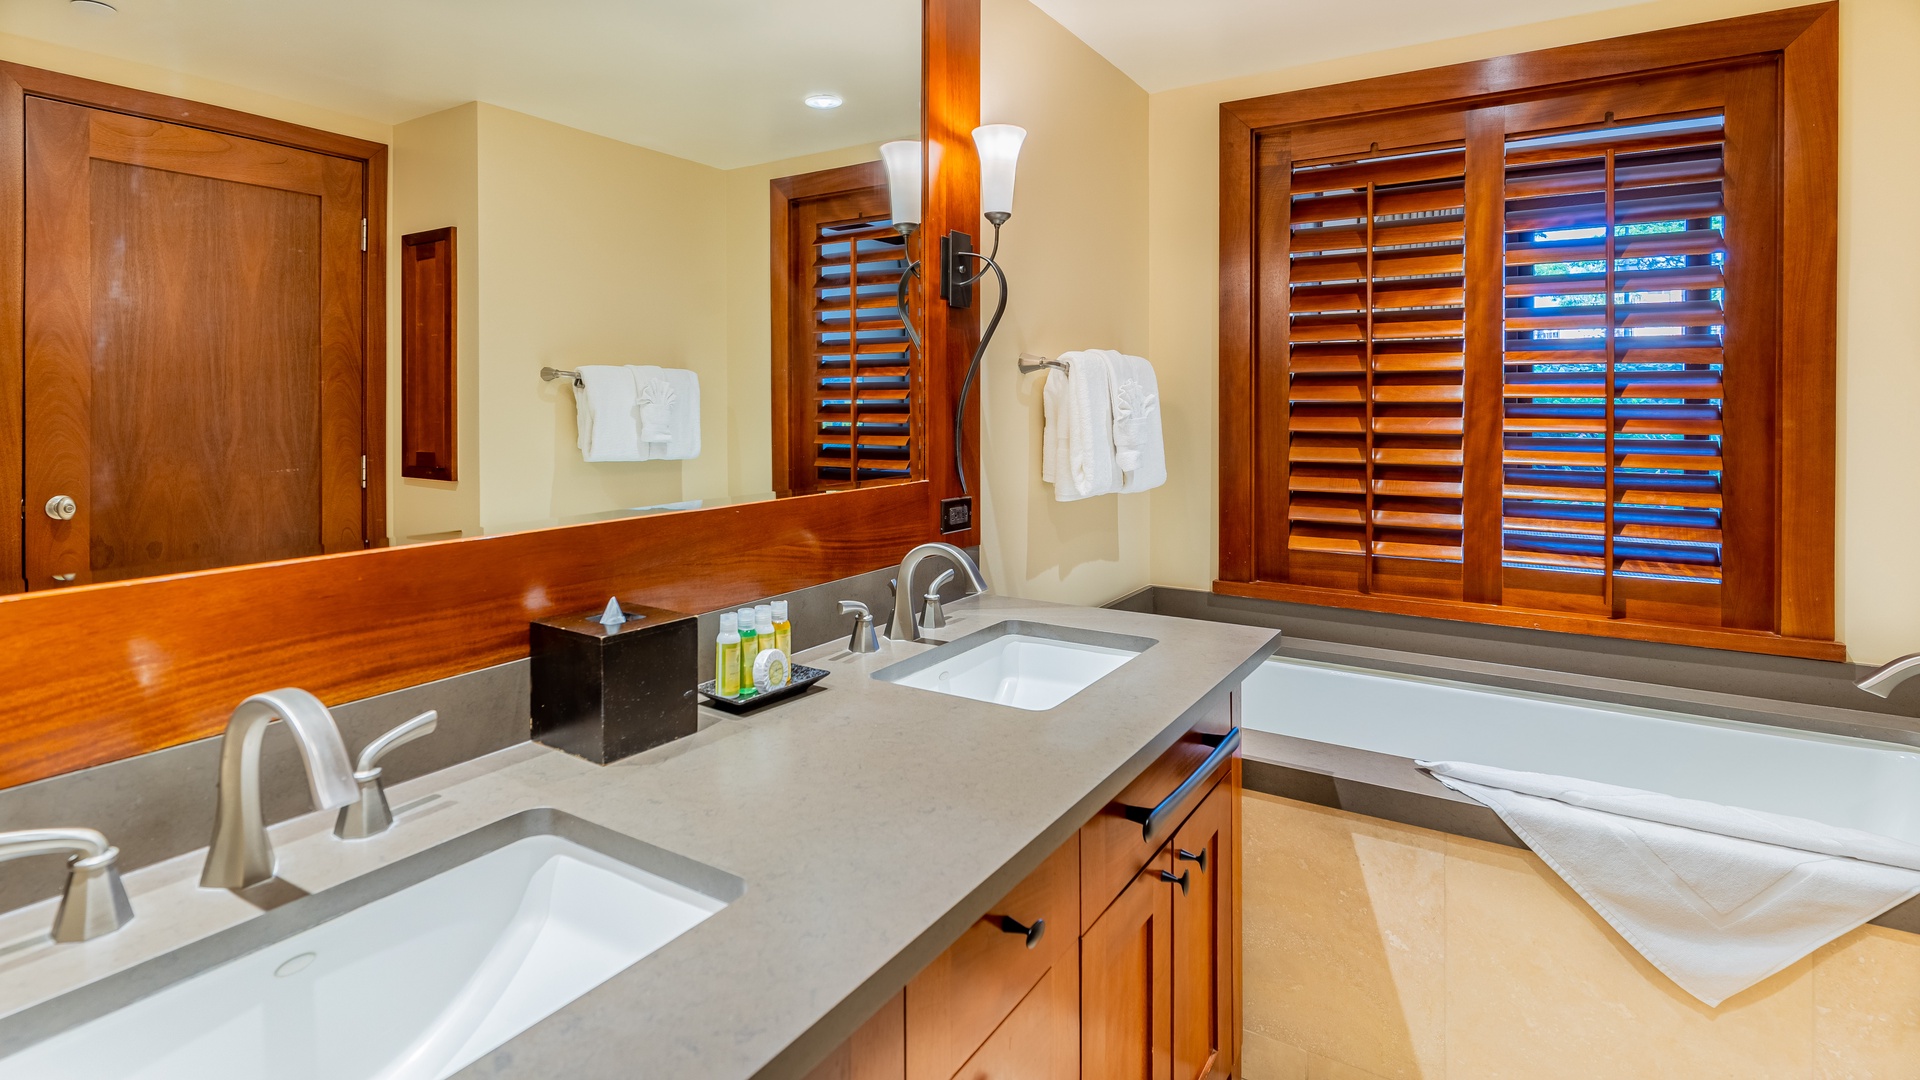 Kapolei Vacation Rentals, Ko Olina Beach Villas B102 - The primary guest bathroom with a soaking tub to relax and renew.